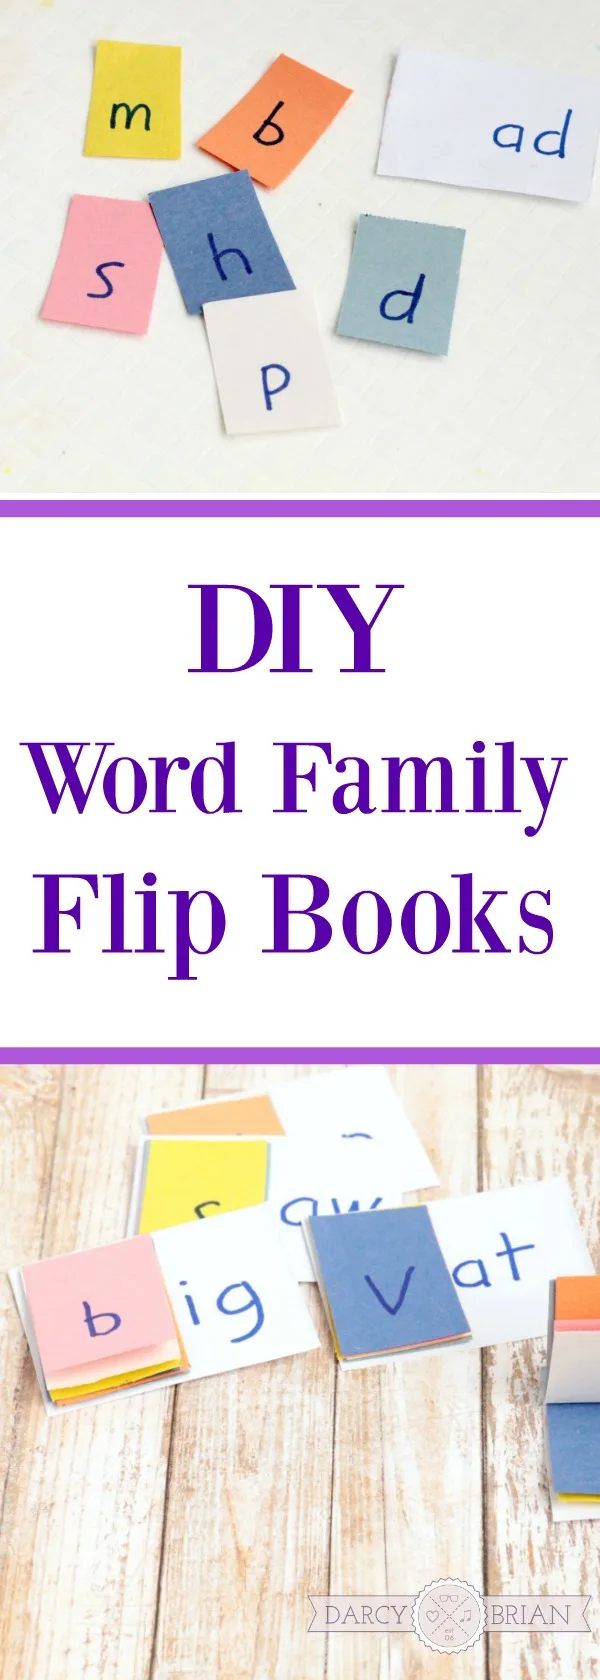 These word family flip books are so easy to make! Looking for fun learning activities to help your kindergartner learn how to read? Make your own DIY sight word family flip book for kindergarten and preschool kids!